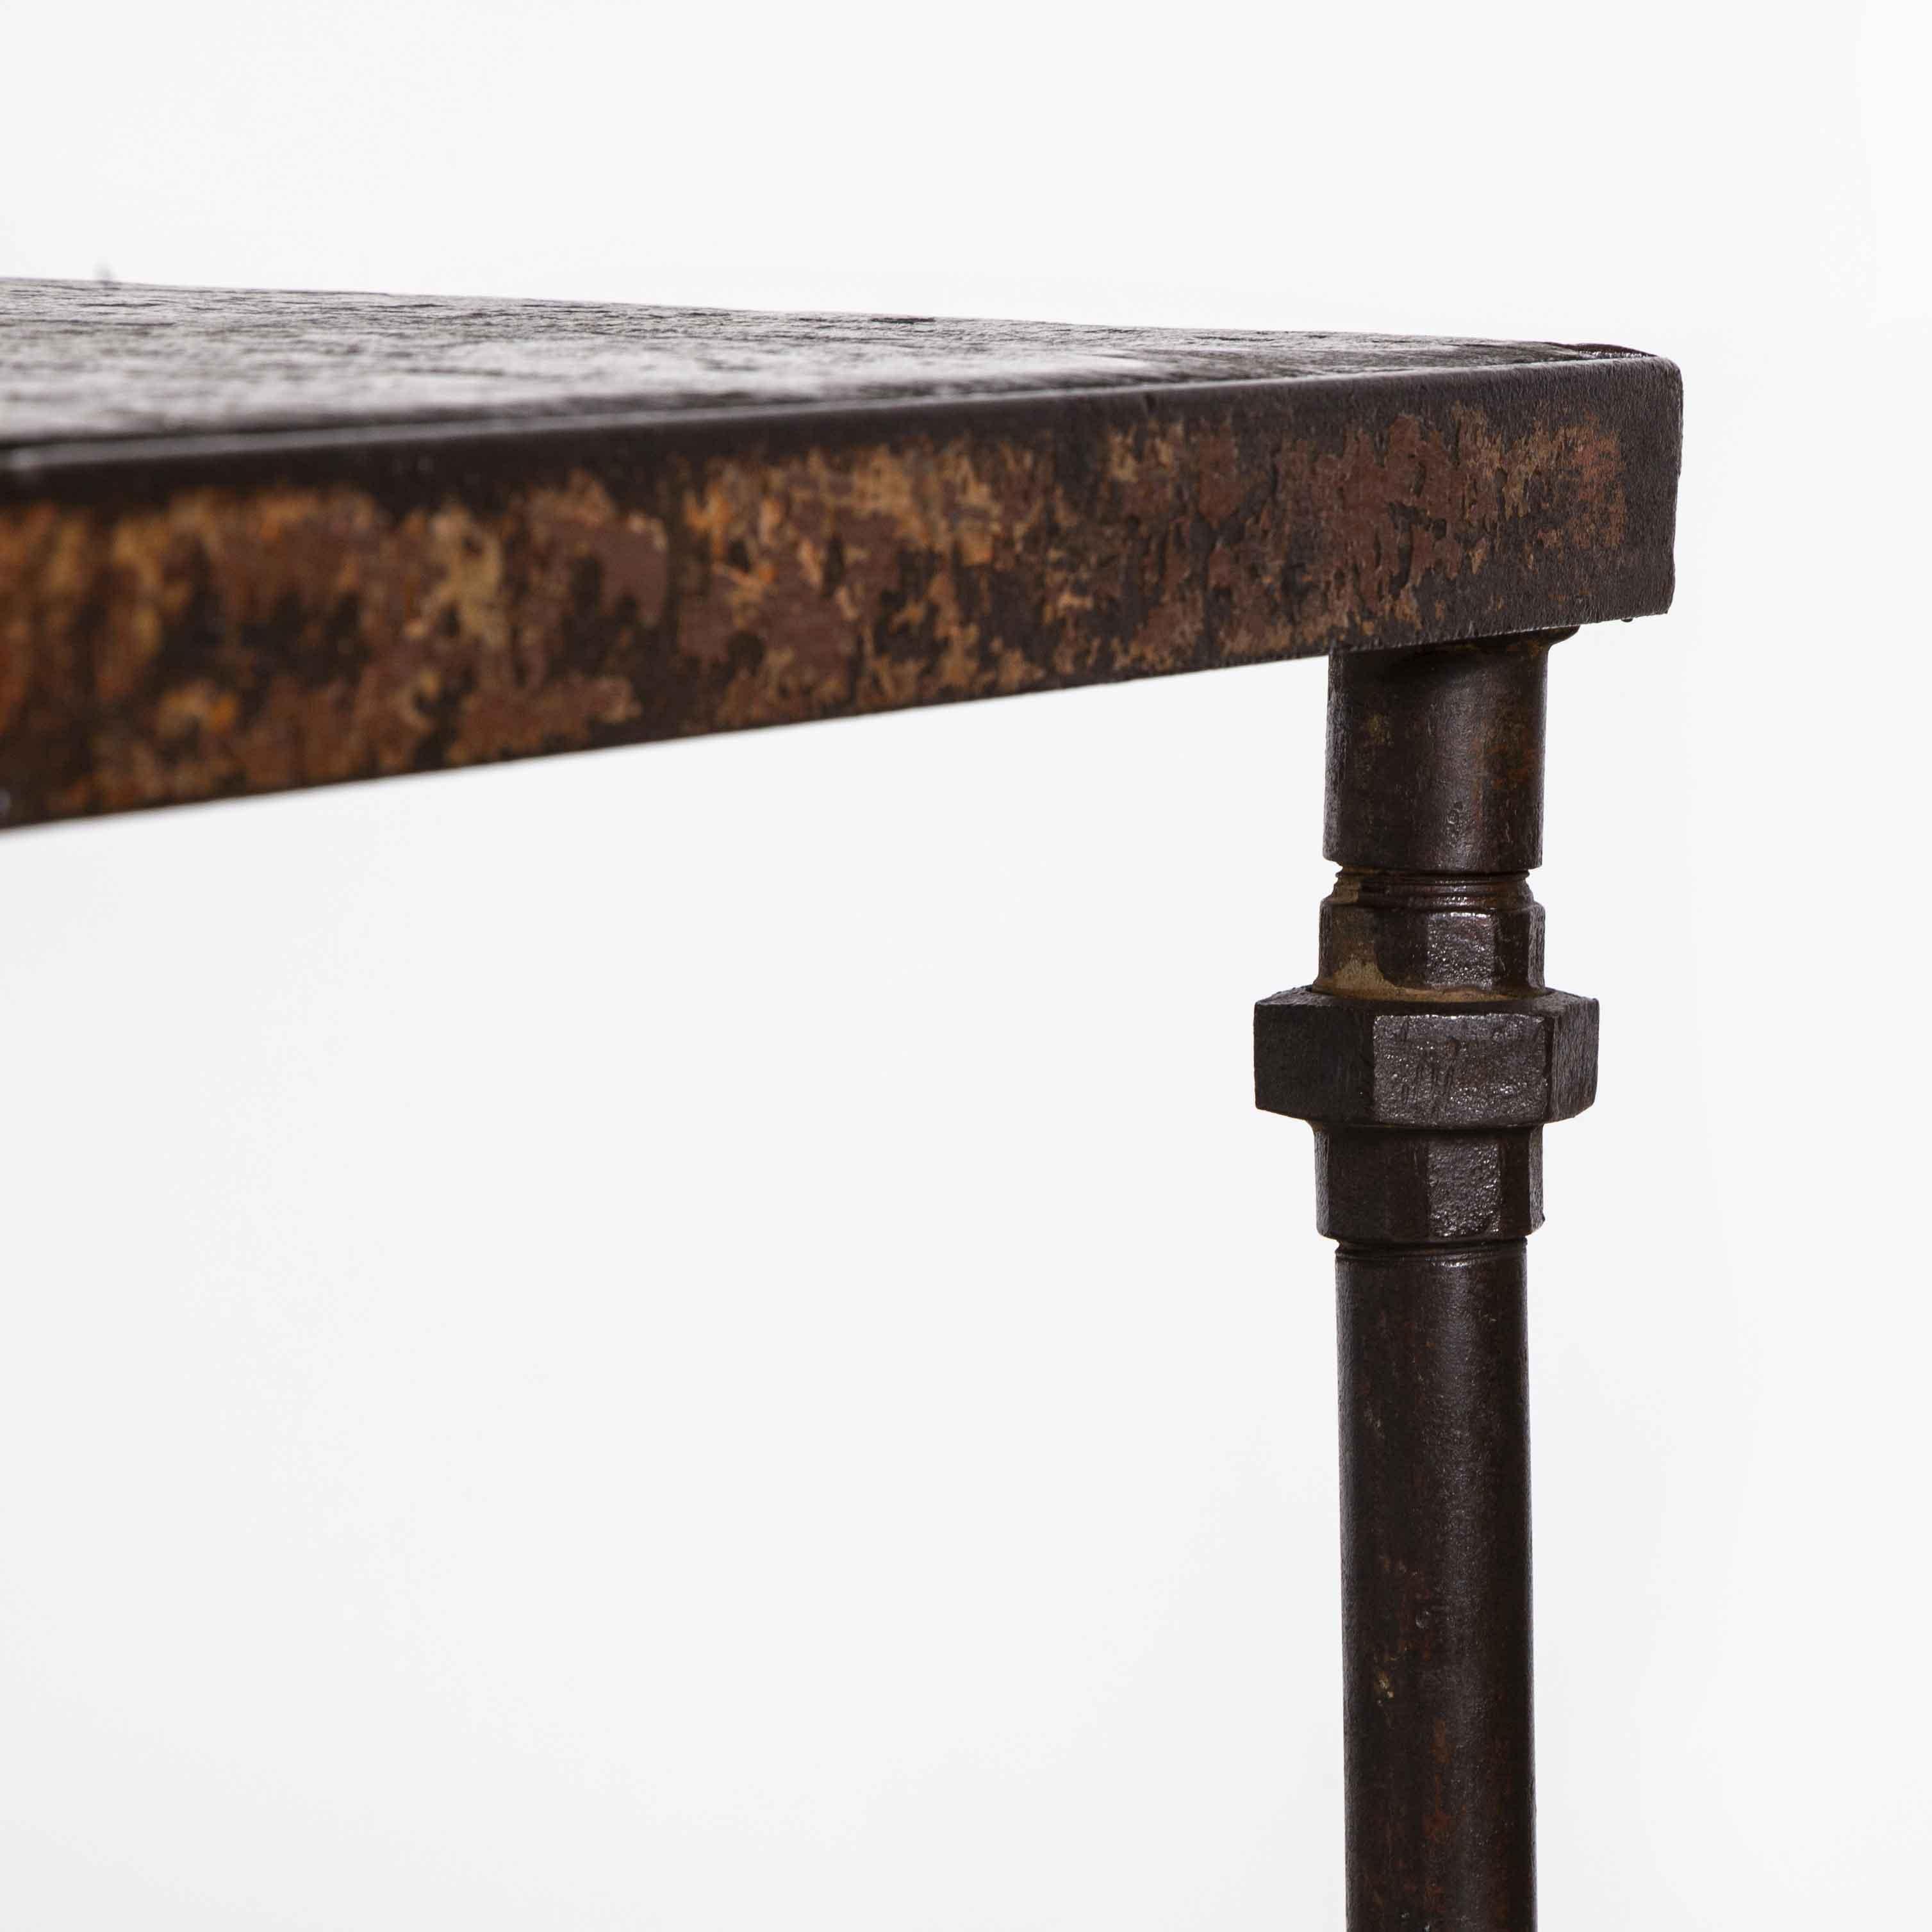 Laminate 1940's Large Square Industrial Console Table